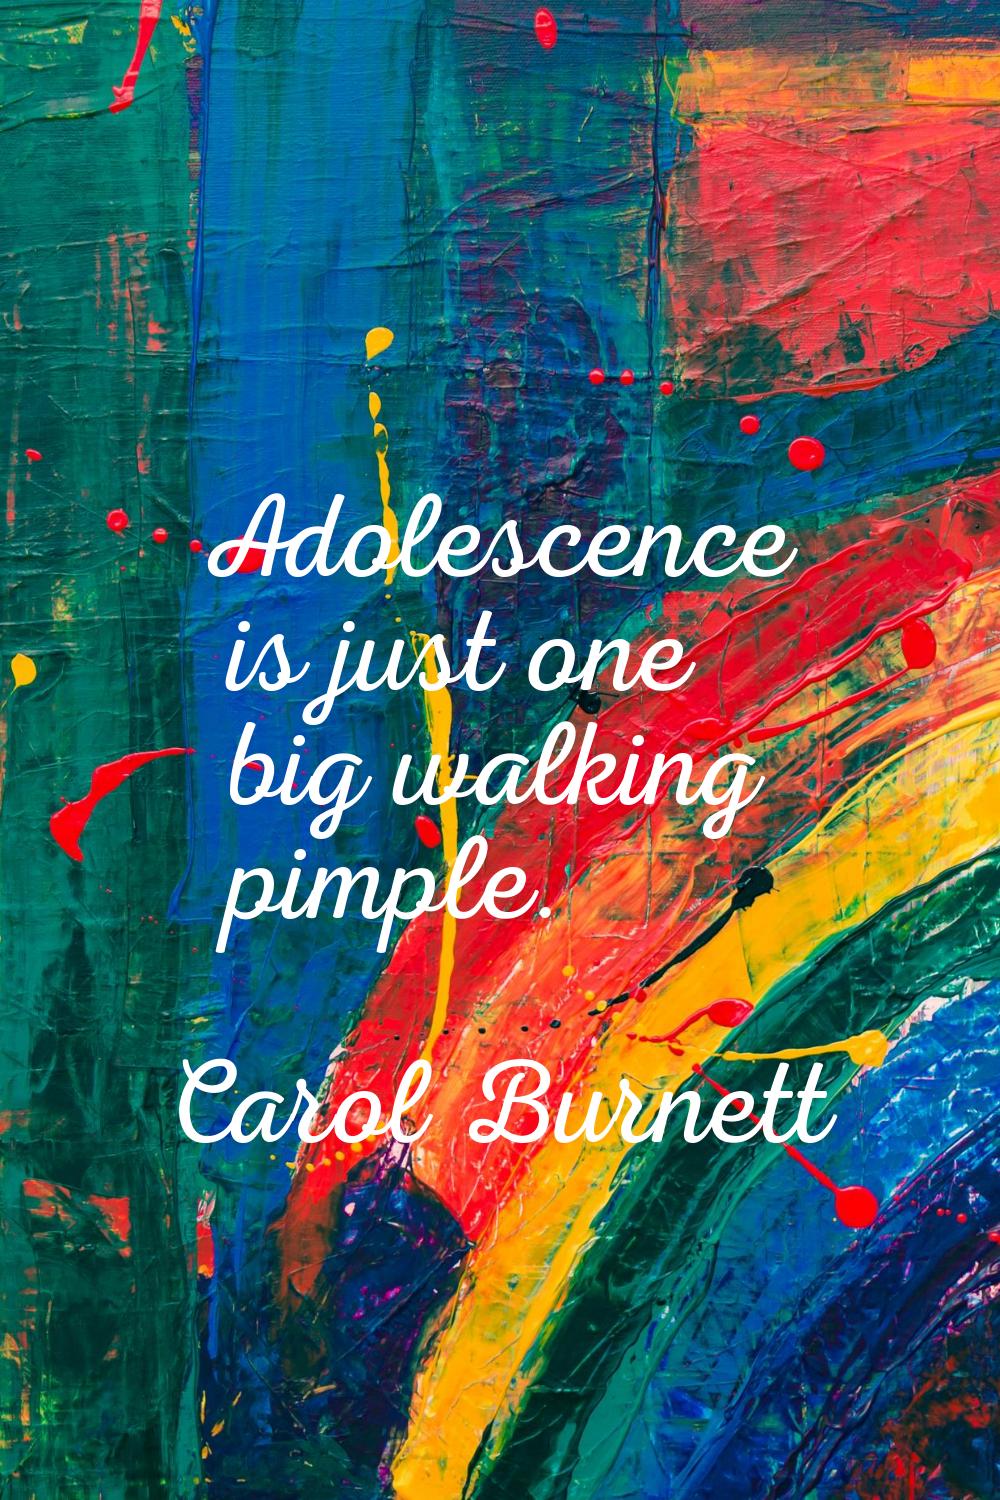 Adolescence is just one big walking pimple.